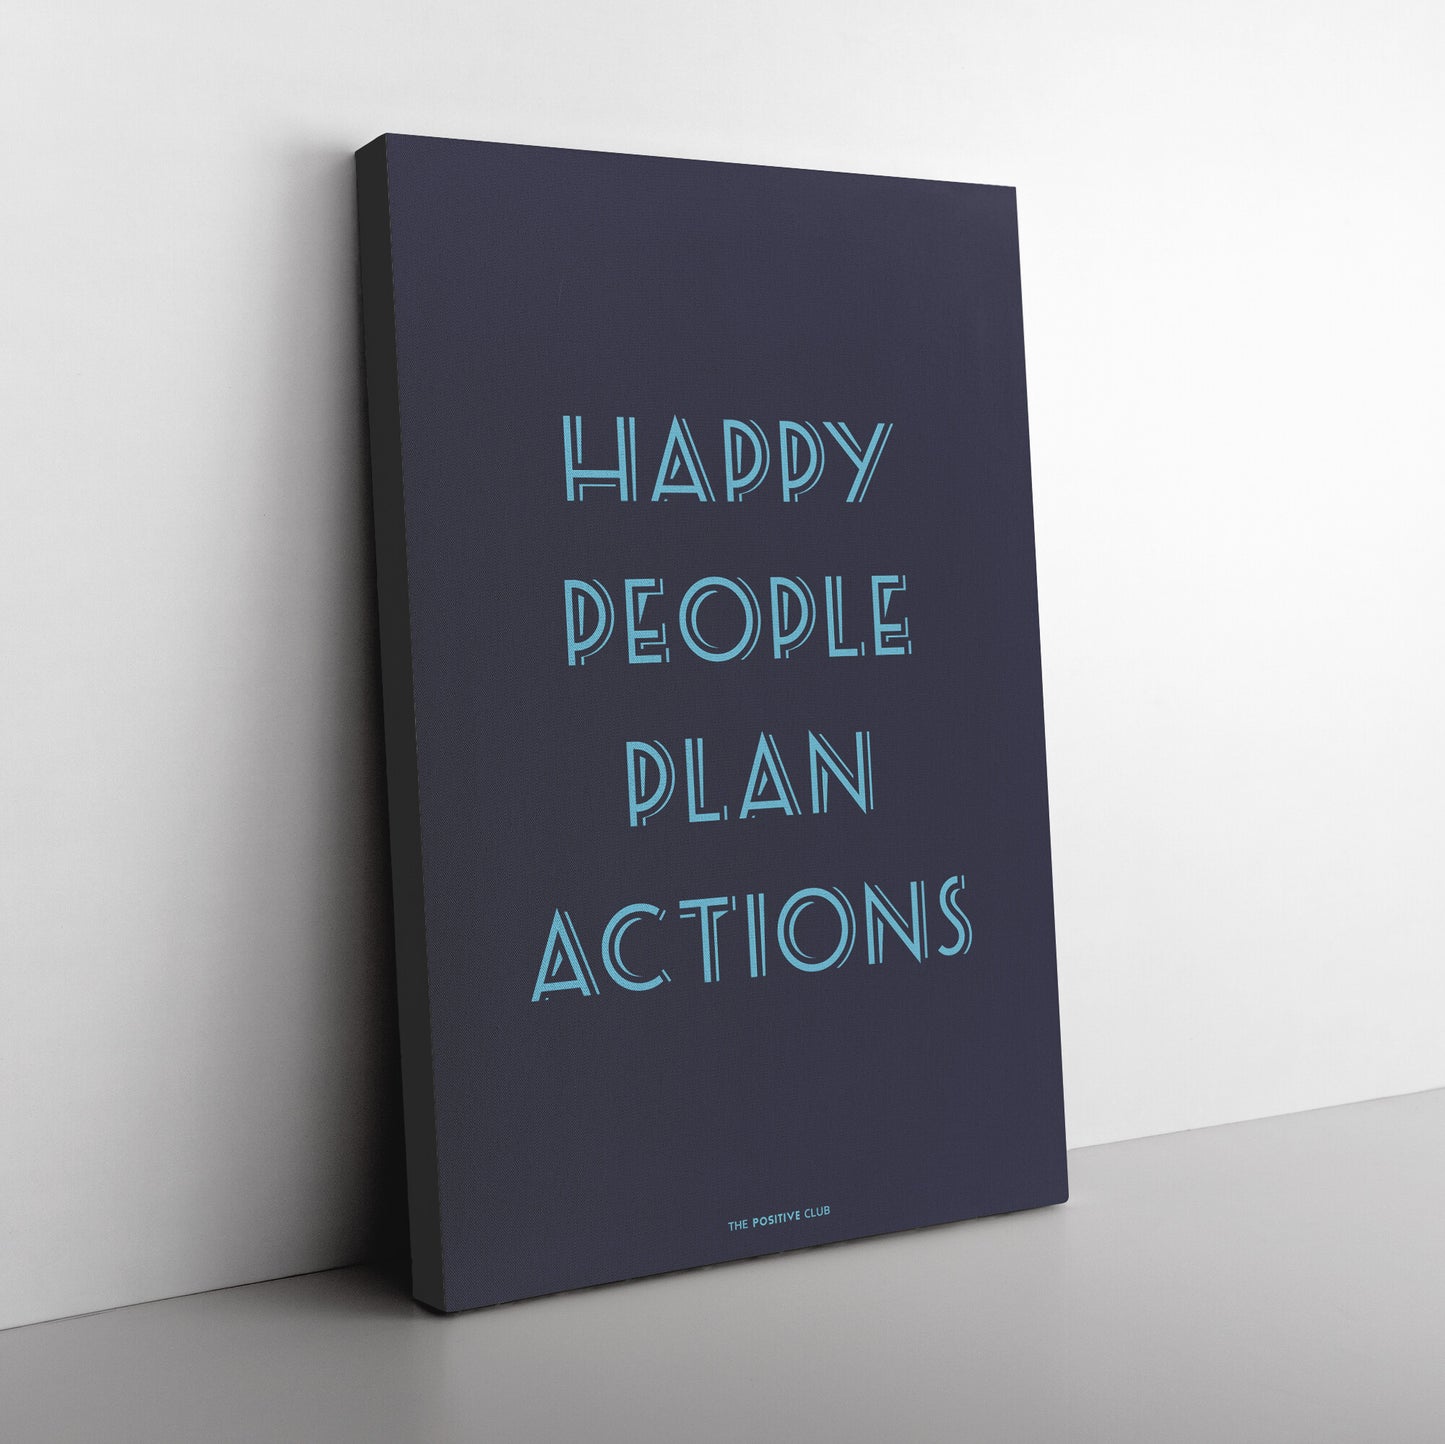 HAPPY PEOPLE PLAN ACTIONS